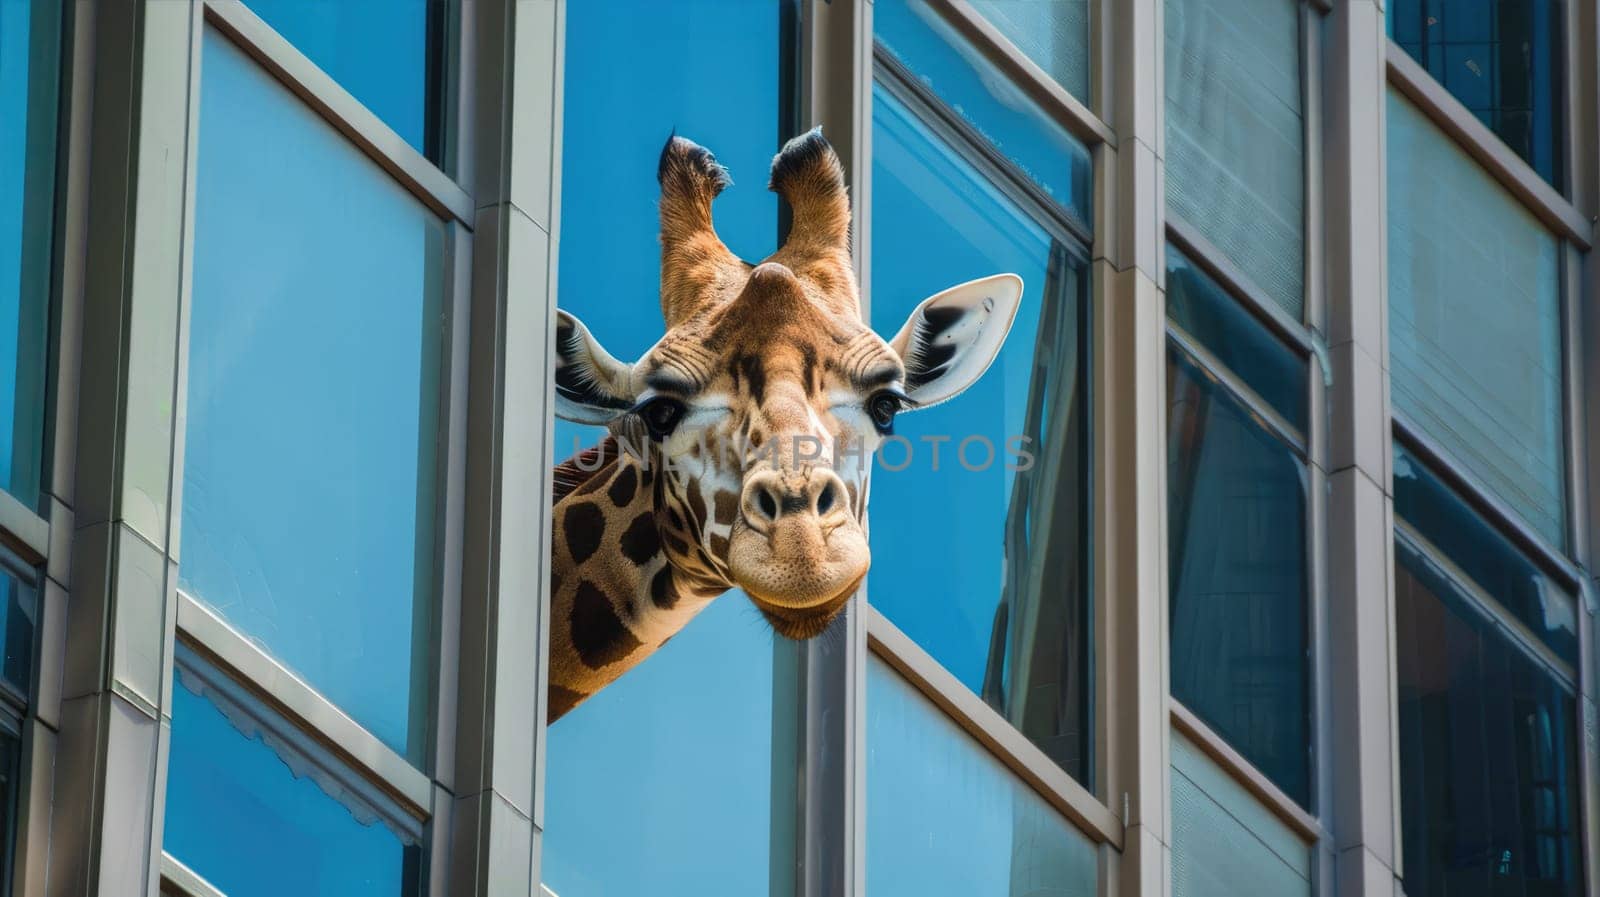 Giraffe in the city, looking up at skyscrapers. A giraffe near the window of an office building. AI